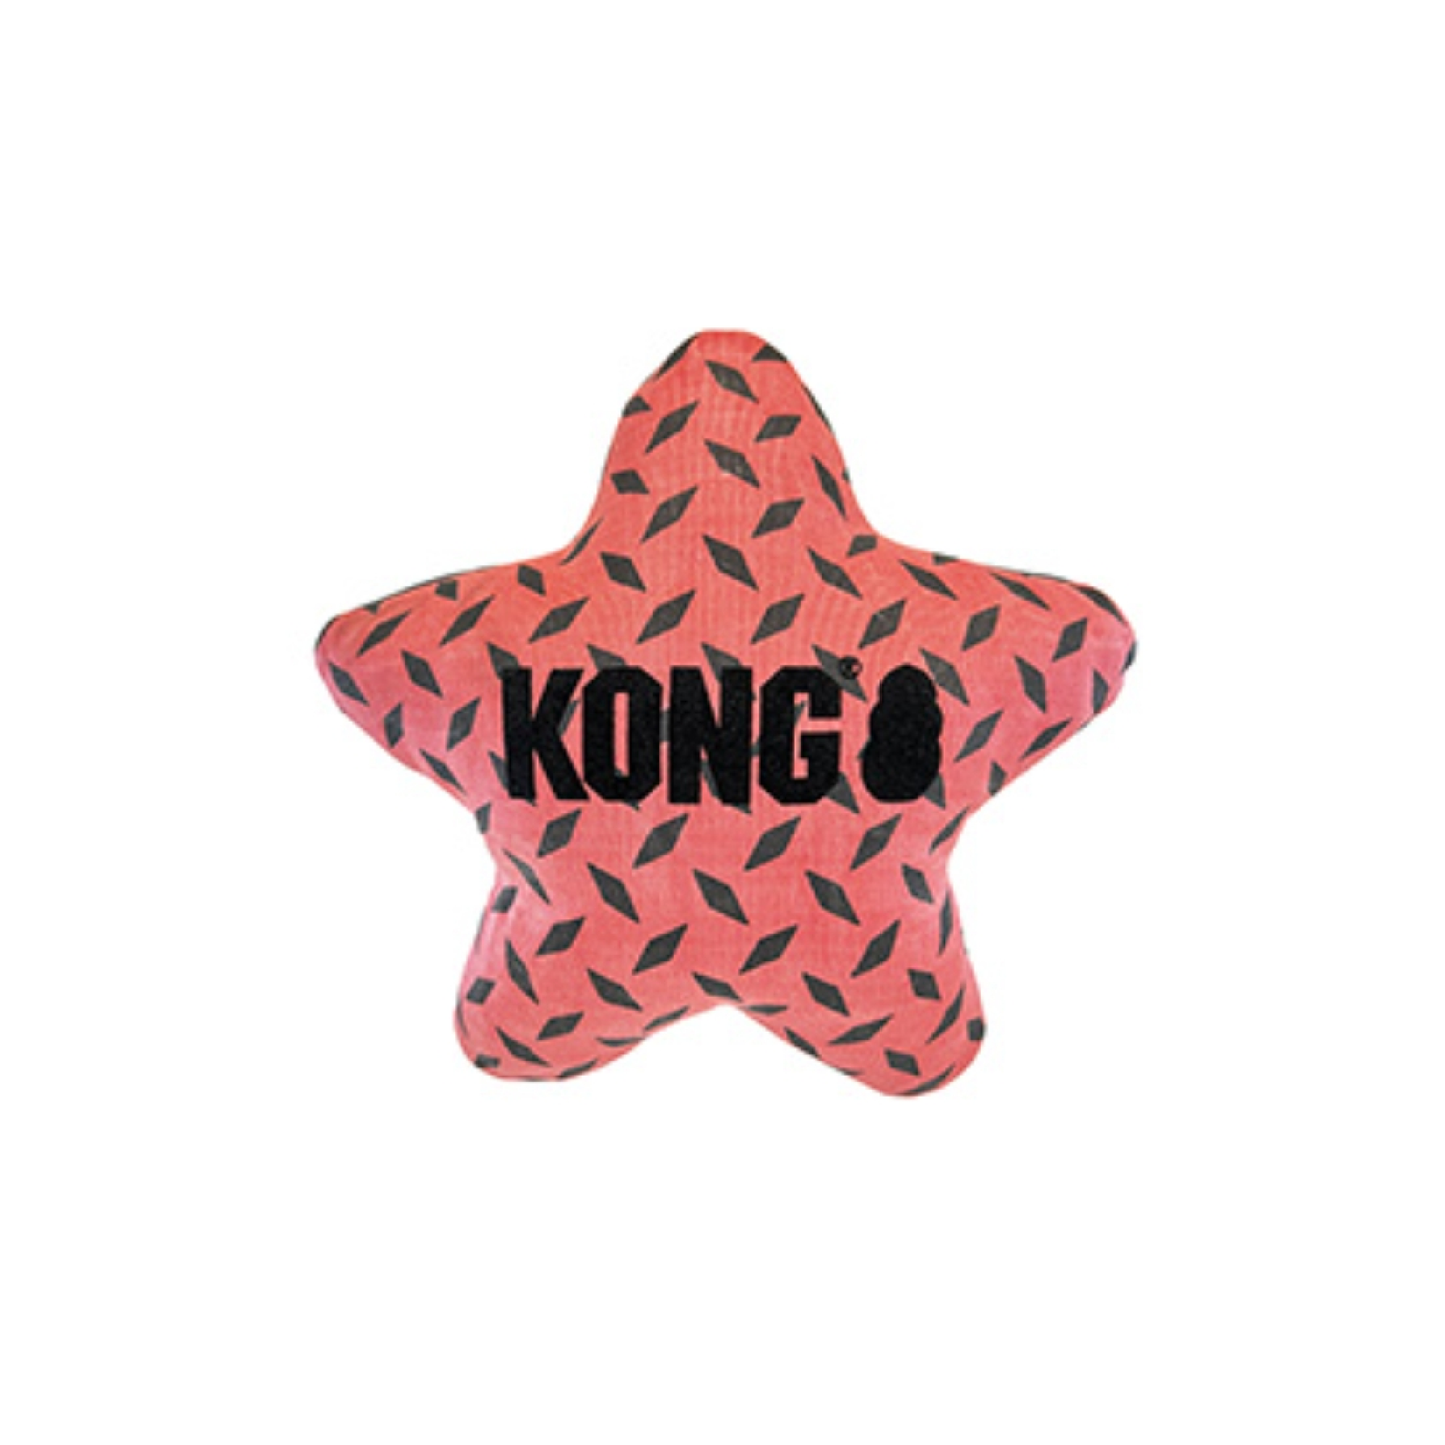 Kong Maxx Star toy for dogs.